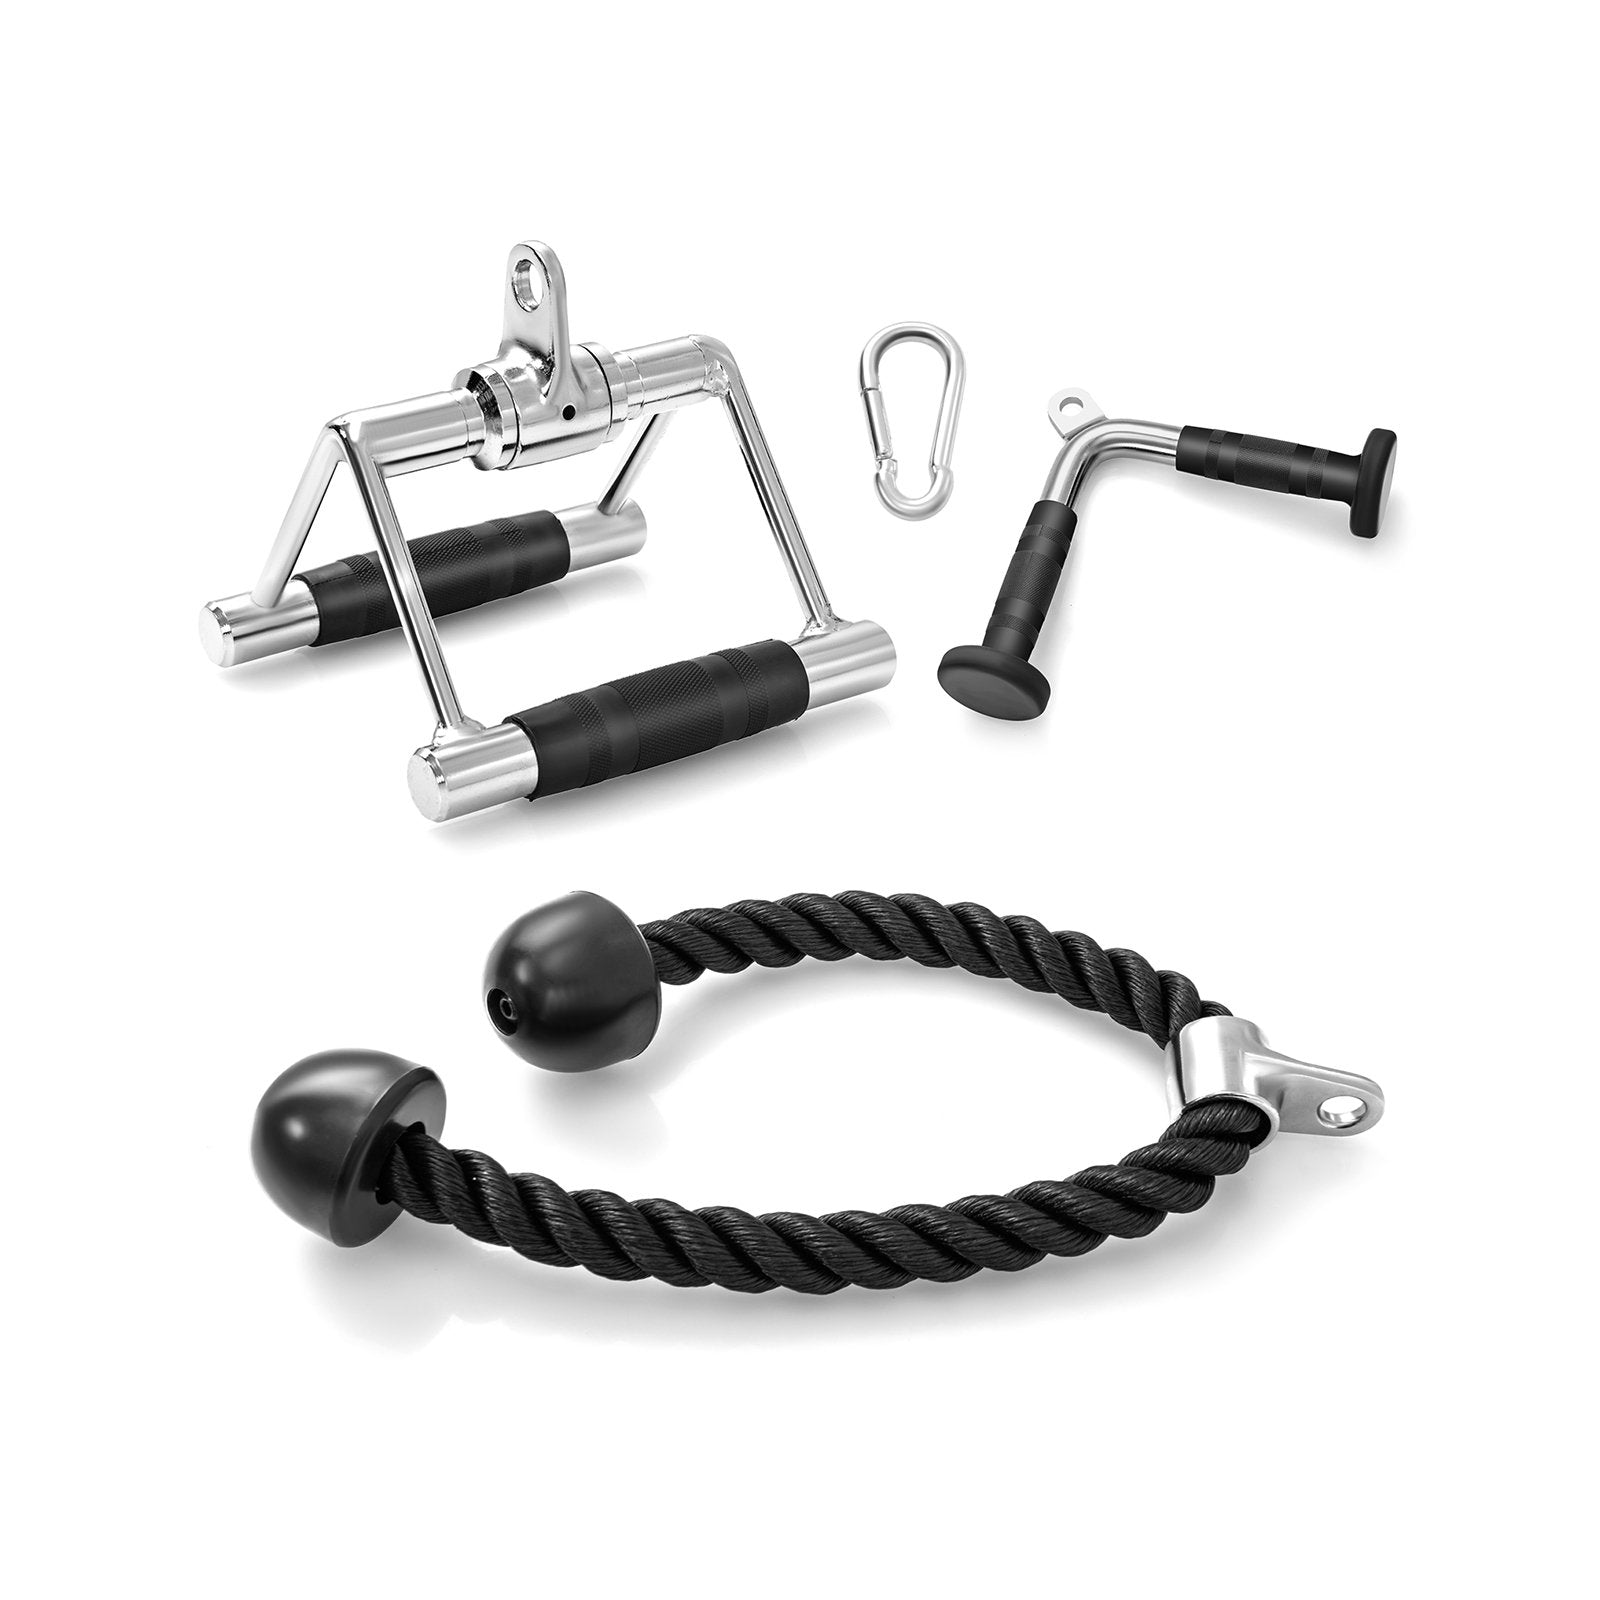 3-Piece Cable Machine Attachment Set for Home Gym at Gallery Canada